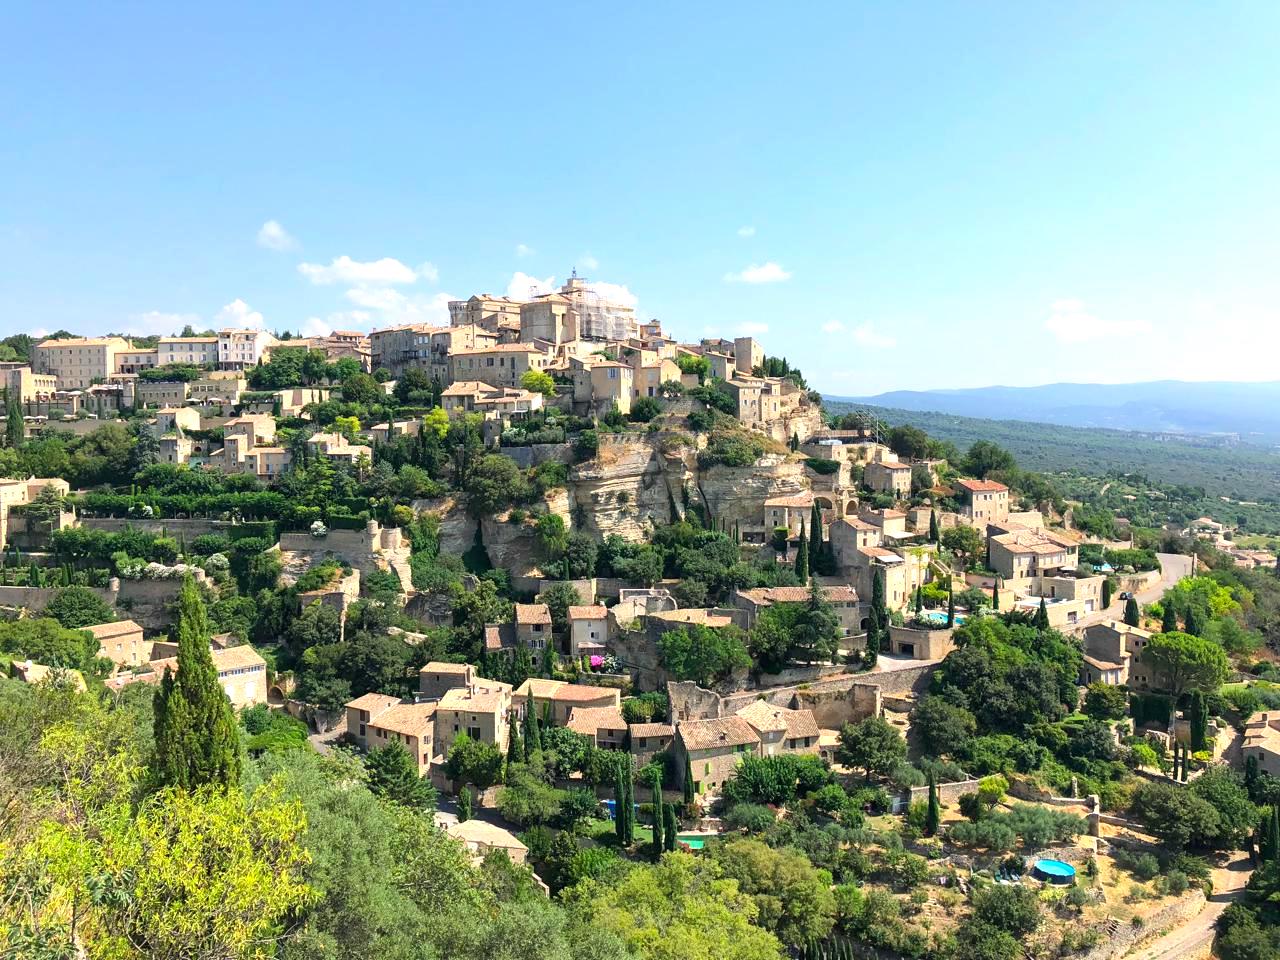 Gordes | Photo by Madelin Tomelty